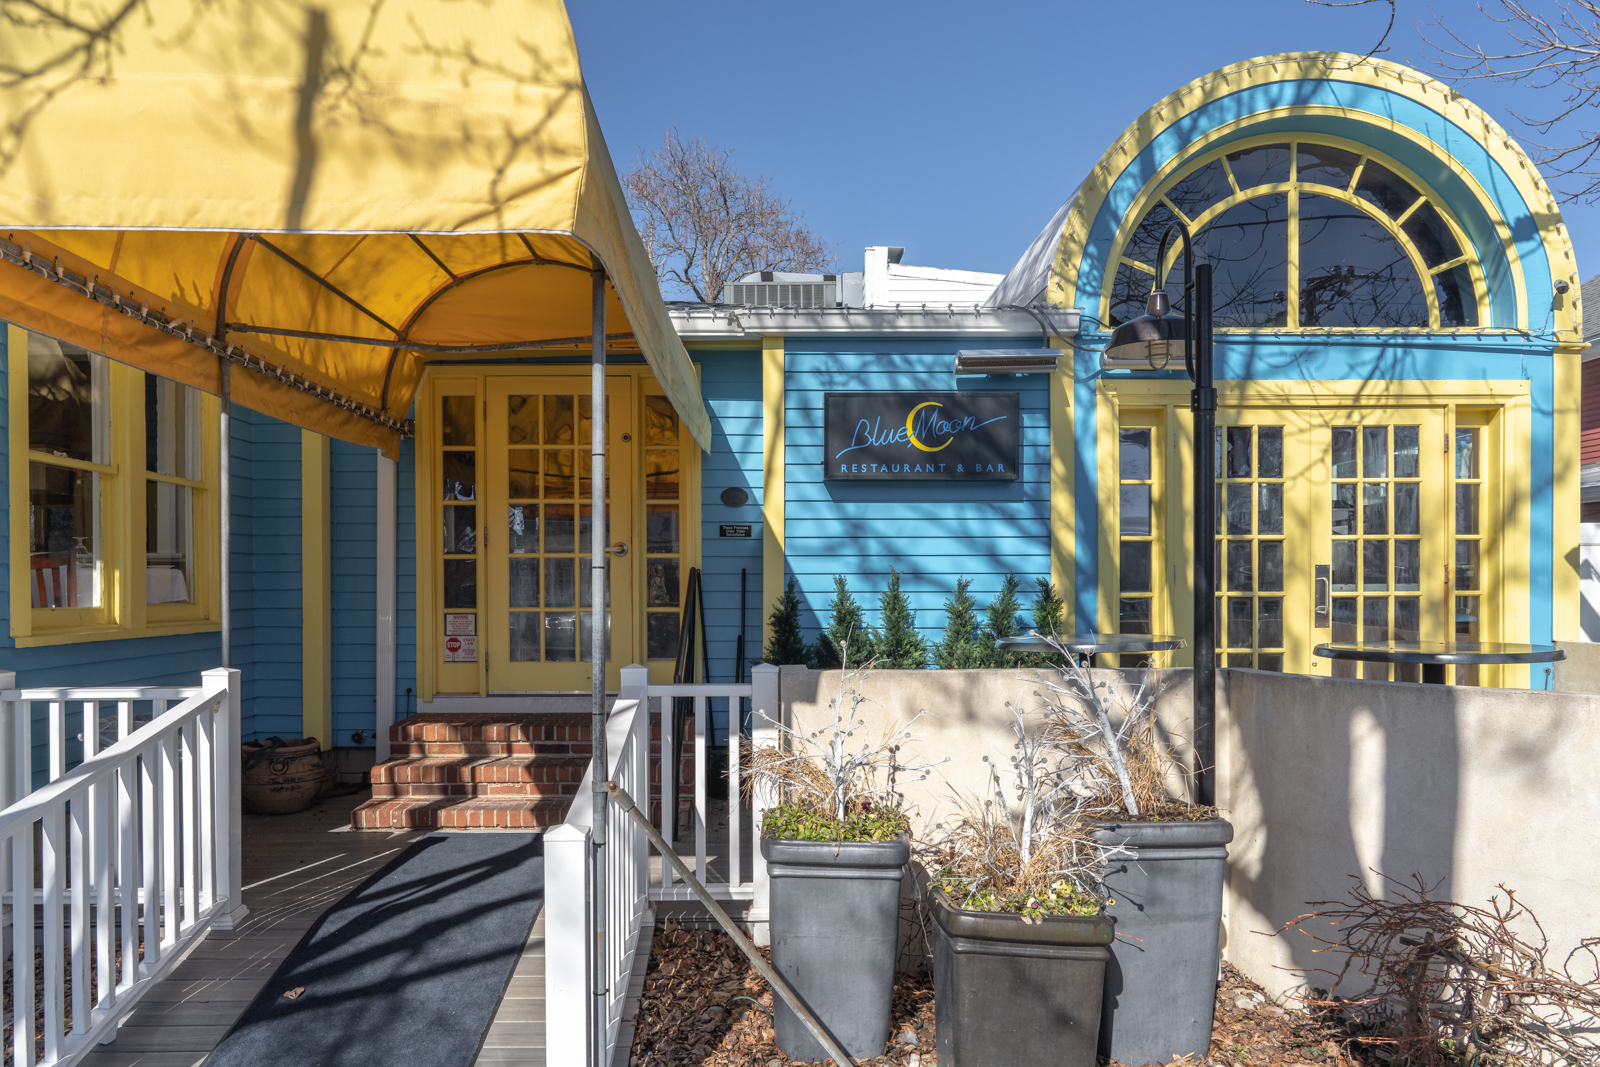 a photo of the exterior and entrance to Blue Moon Restaurant and Bar. The building is light blue with yellow doors, trim, and a yellow awning. There are three planters in front of the building. 